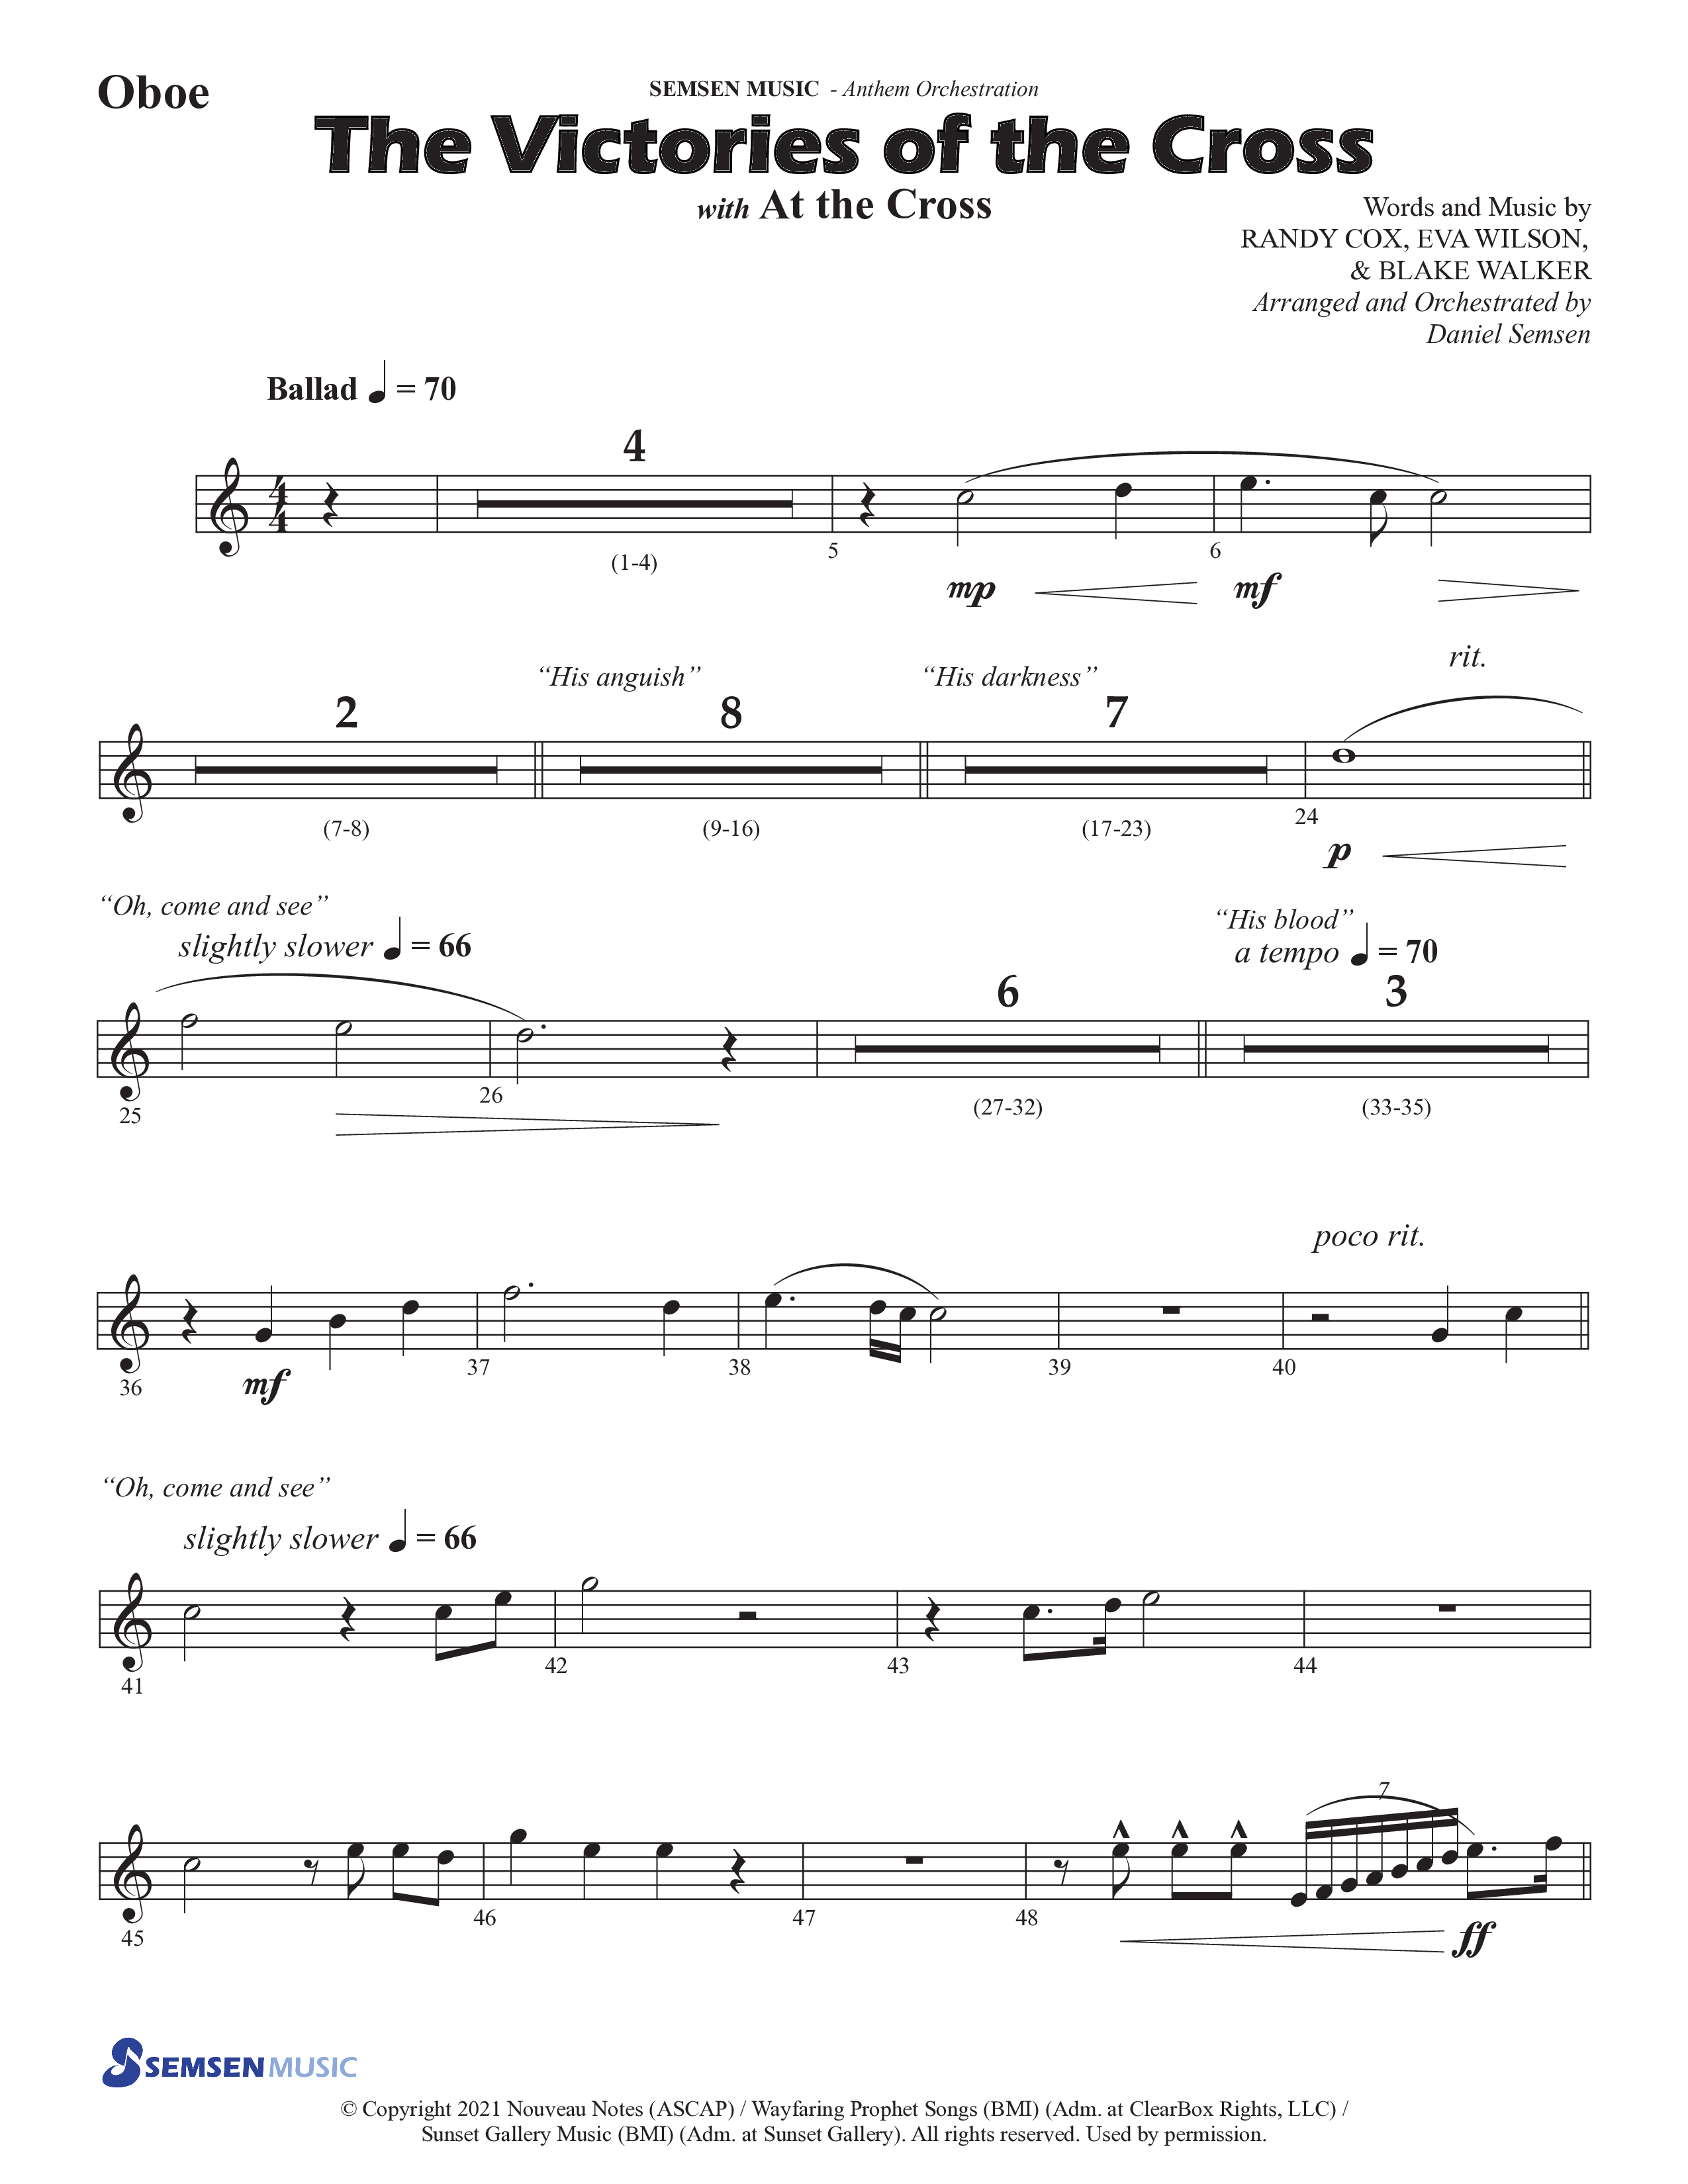 The Victories Of The Cross (with At The Cross) (Choral Anthem SATB) Oboe (Semsen Music / Arr. Daniel Semsen)